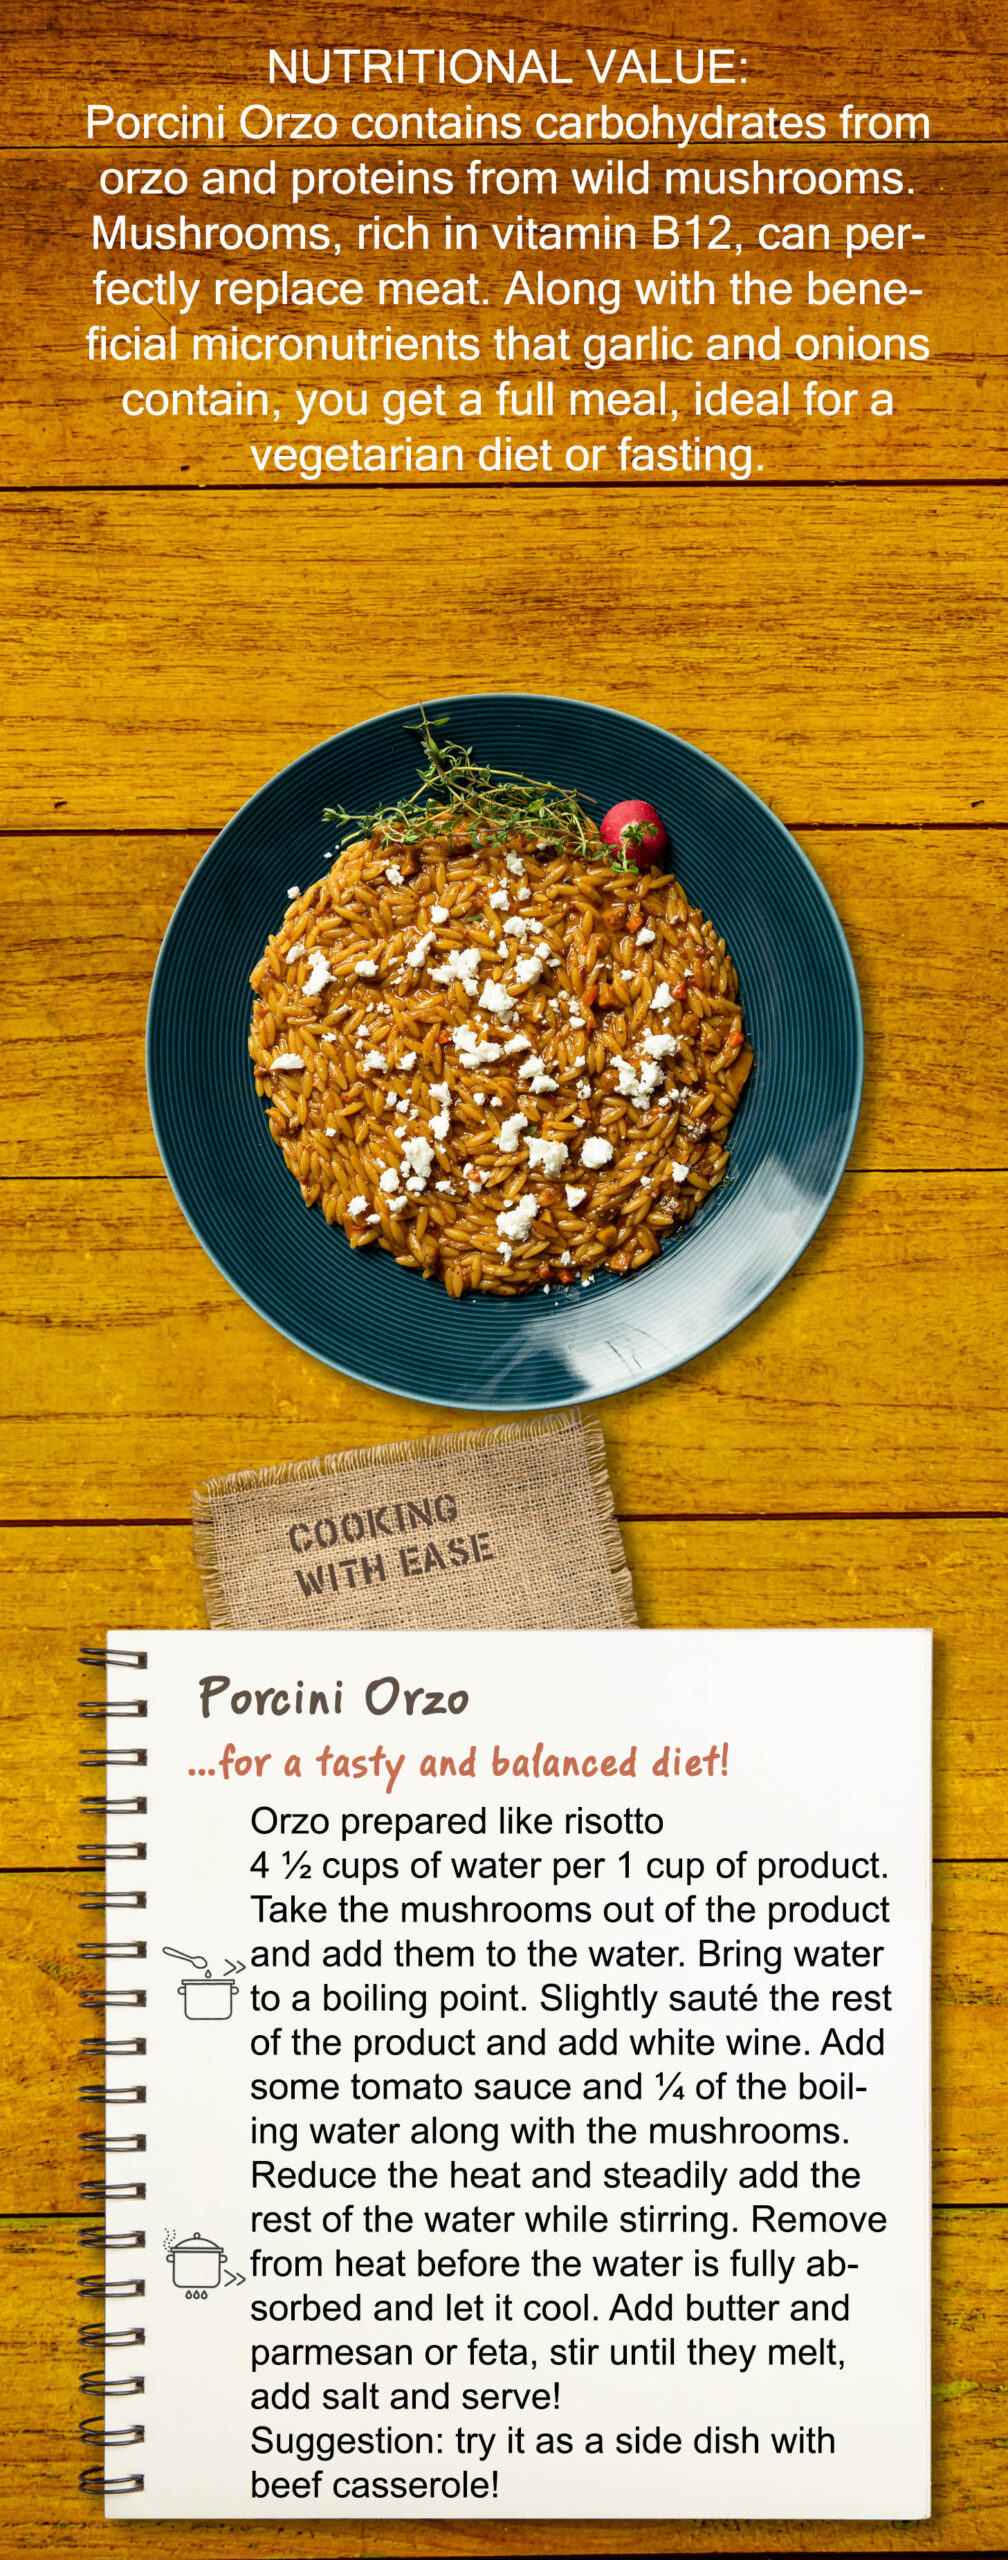 Porcini Orzo contains carbohydrates from orzo and proteins from wild mushrooms. Mushrooms, rich in vitamin B12, can perfectly replace meat. Along with the beneficial micronutrients that garlic and onions contain, you get a full meal, ideal for a vegetarian diet or fasting. Easy to Cook Orzo prepared like risotto 4 ½ cups of water per 1 cup of product. Take the mushrooms out of the product and add them to the water. Bring water to a boiling point. Slightly sauté the rest of the product and add white wine. Add some tomato sauce and ¼ of the boiling water along with the mushrooms. Reduce the heat and steadily add the rest of the water while stirring. Remove from heat before the water is fully absorbed and let it cool. Add butter and parmesan or feta, stir until they melt, add salt and serve! Suggestion: try it as a side dish with beef casserole!